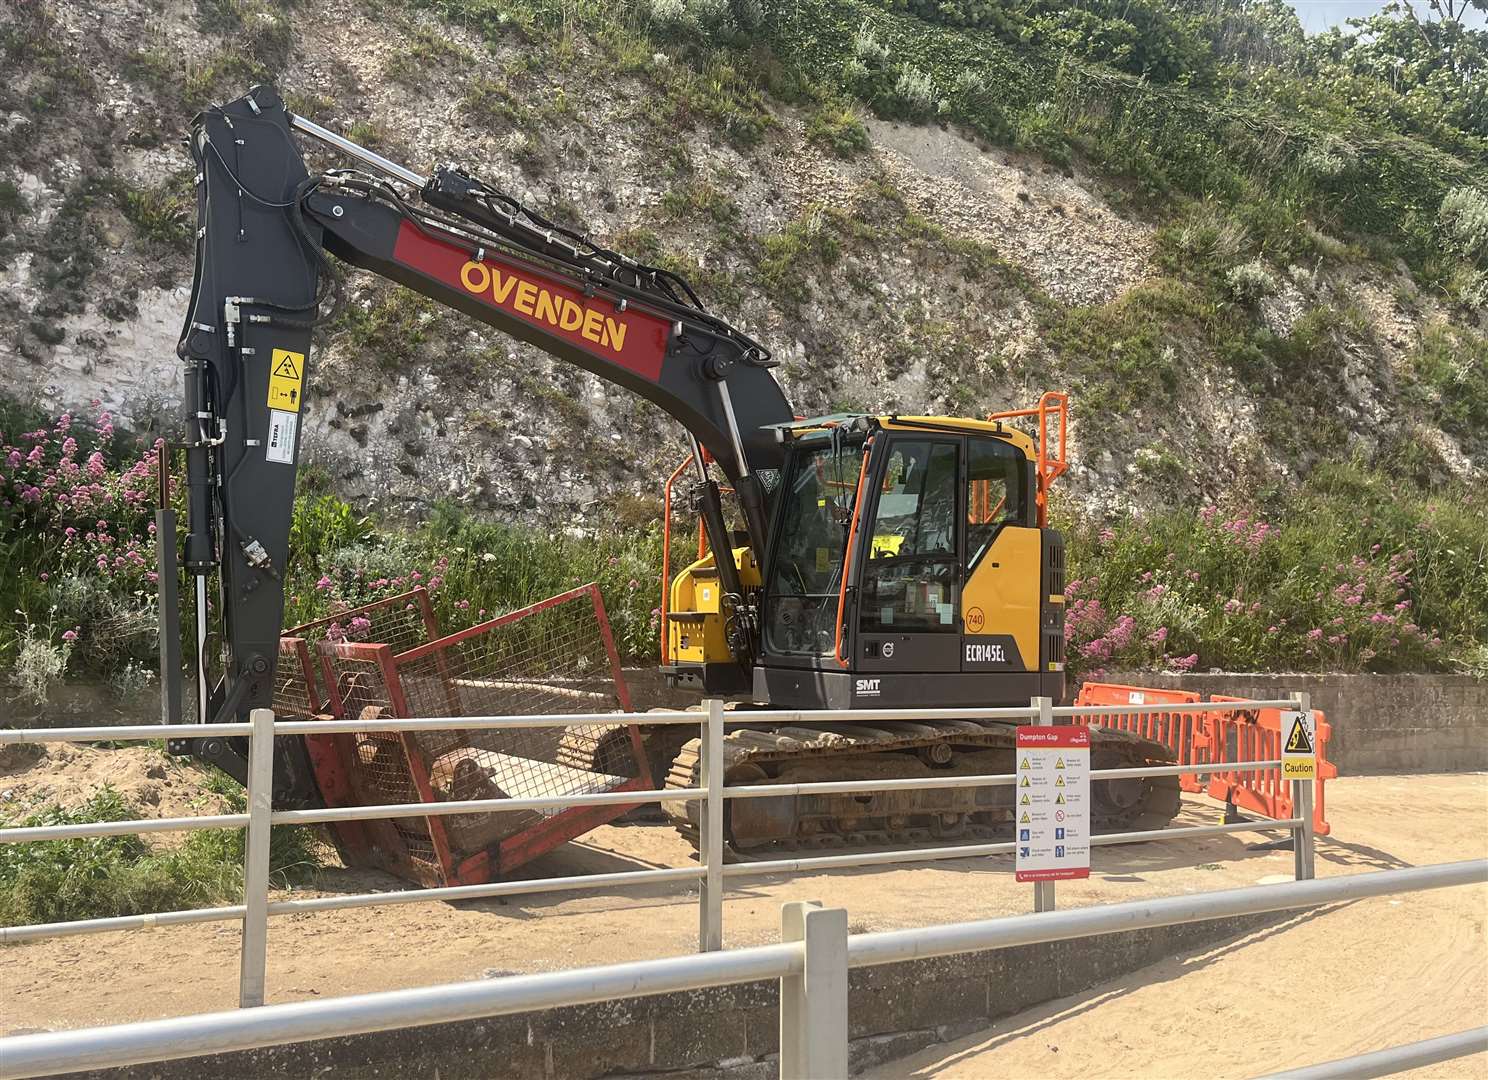 The works at Dumpton Gap in Broadstairs are a part of a wider scheme announced by the Thanet District Council cabinet last year